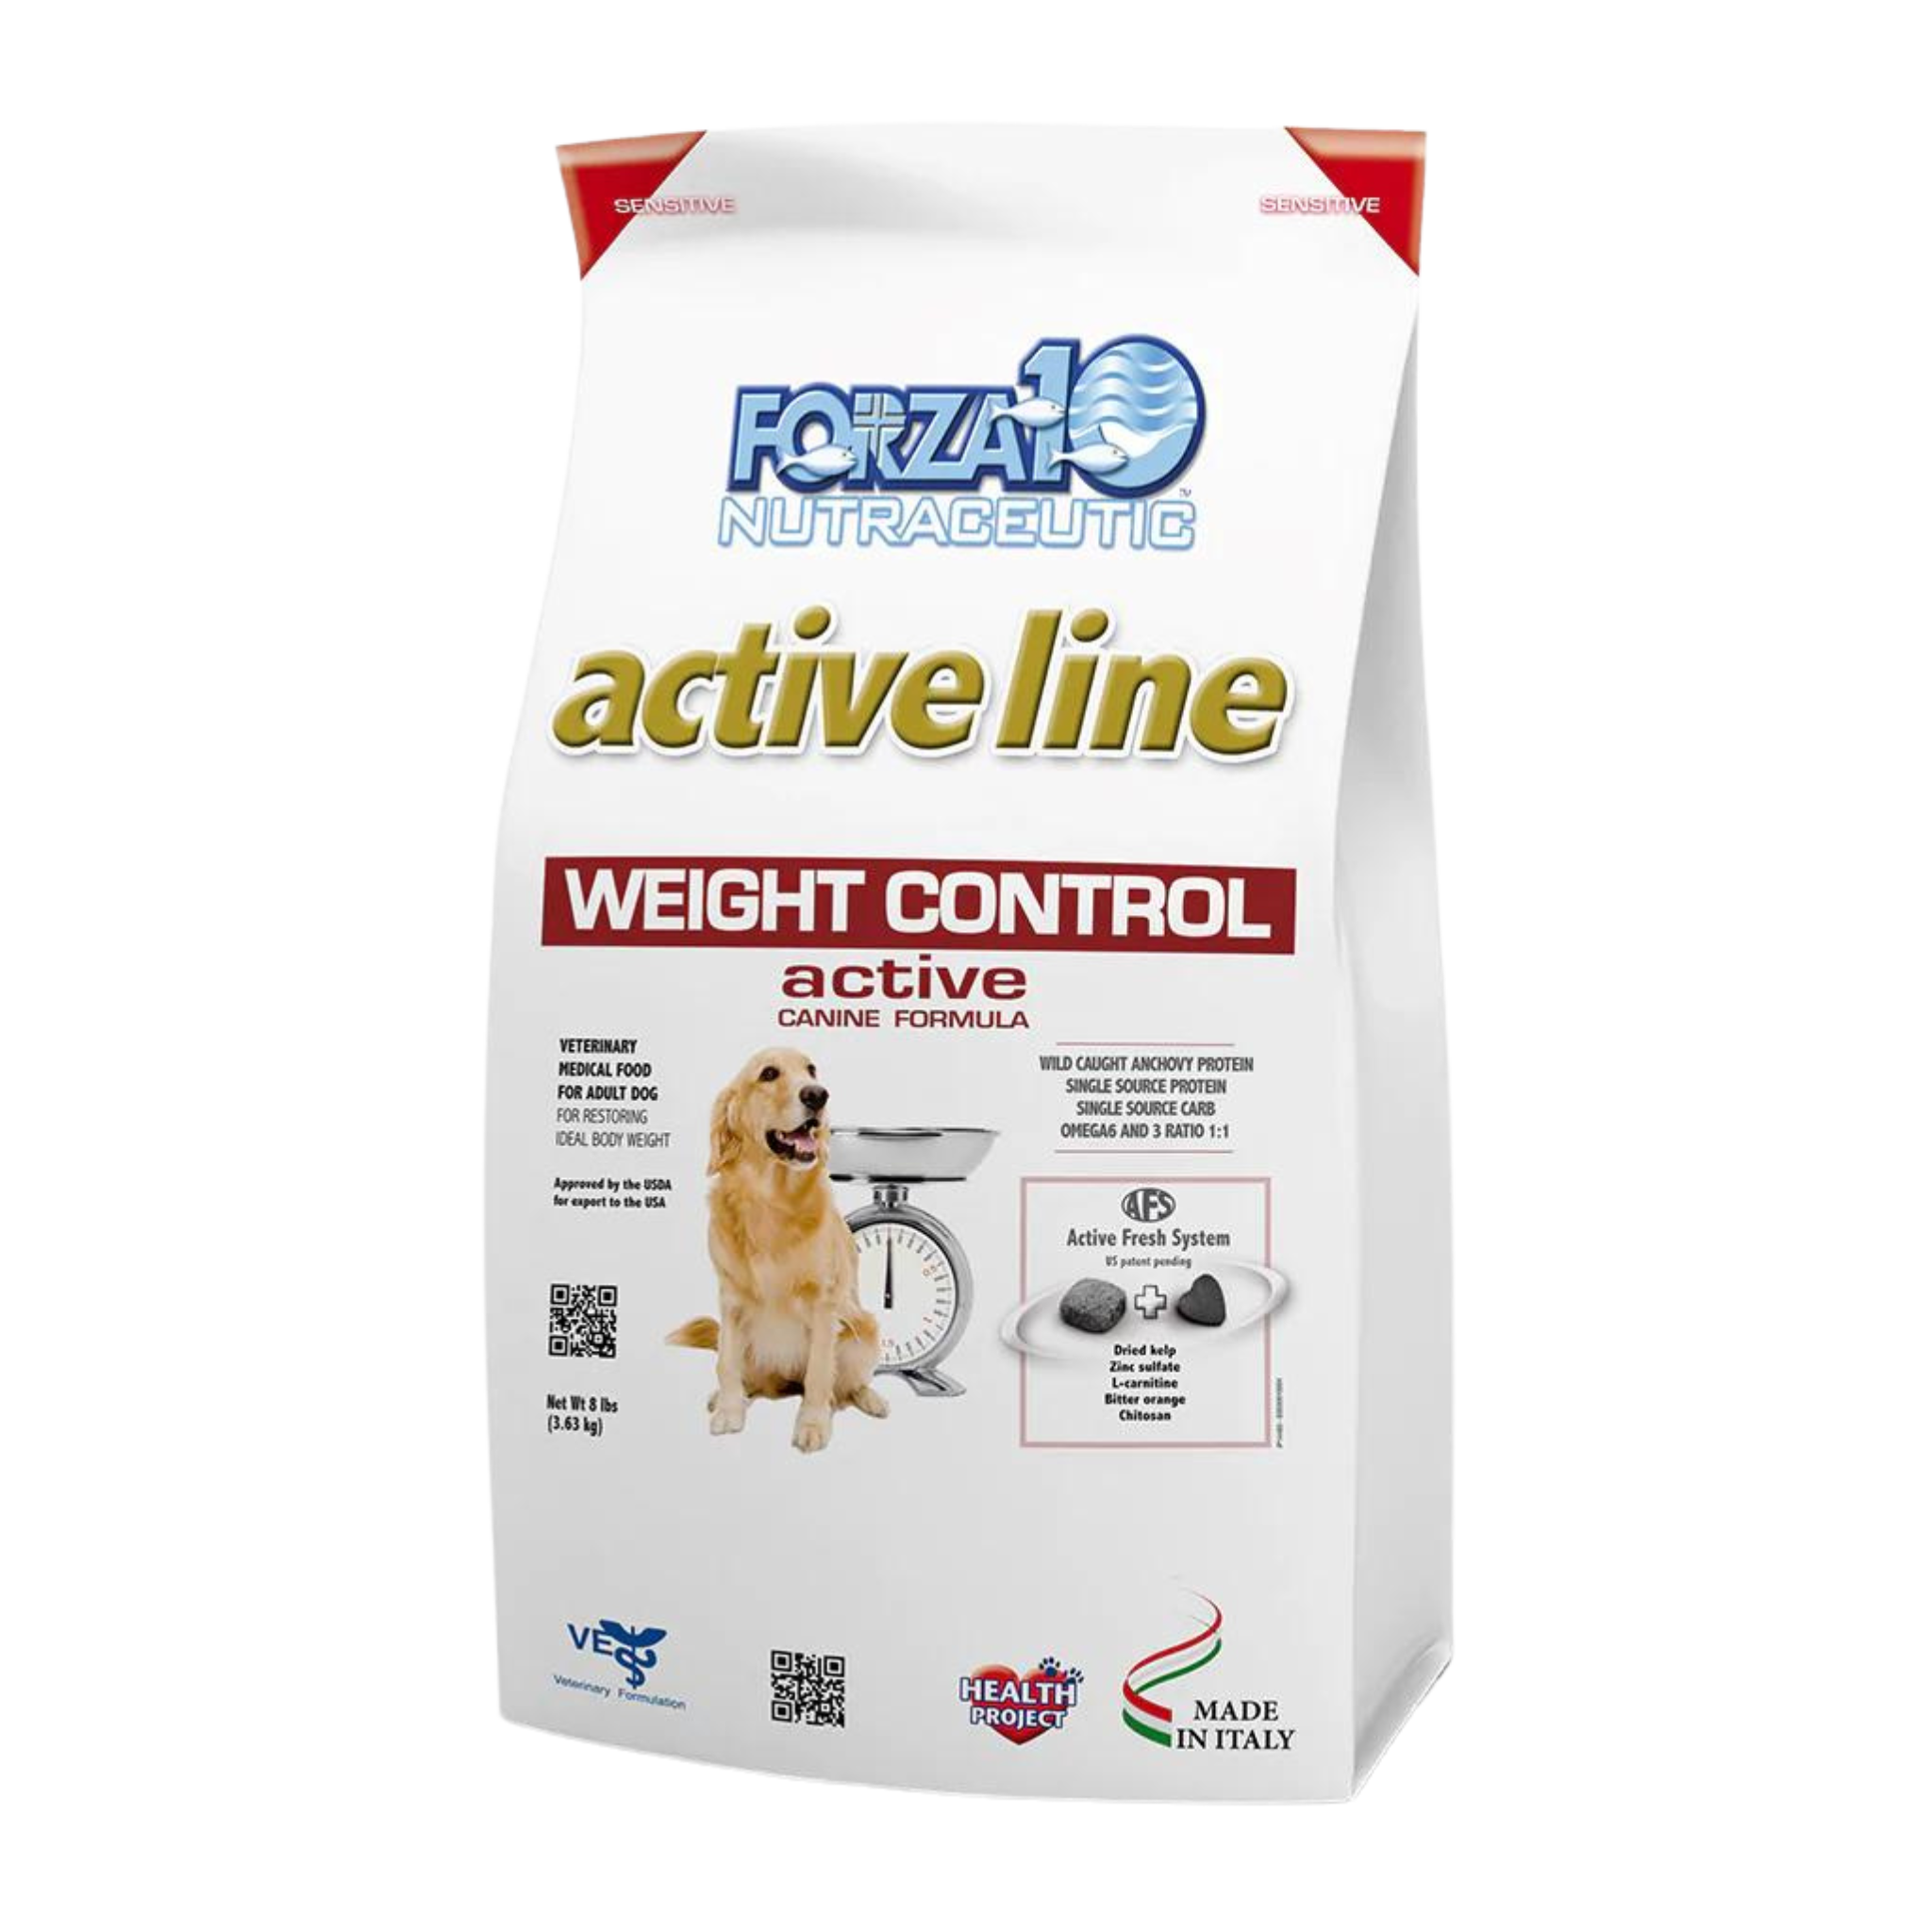 Forza10 Nutraceutic Active Line Weight Control Diet Dry Dog Food bag 8 lbs